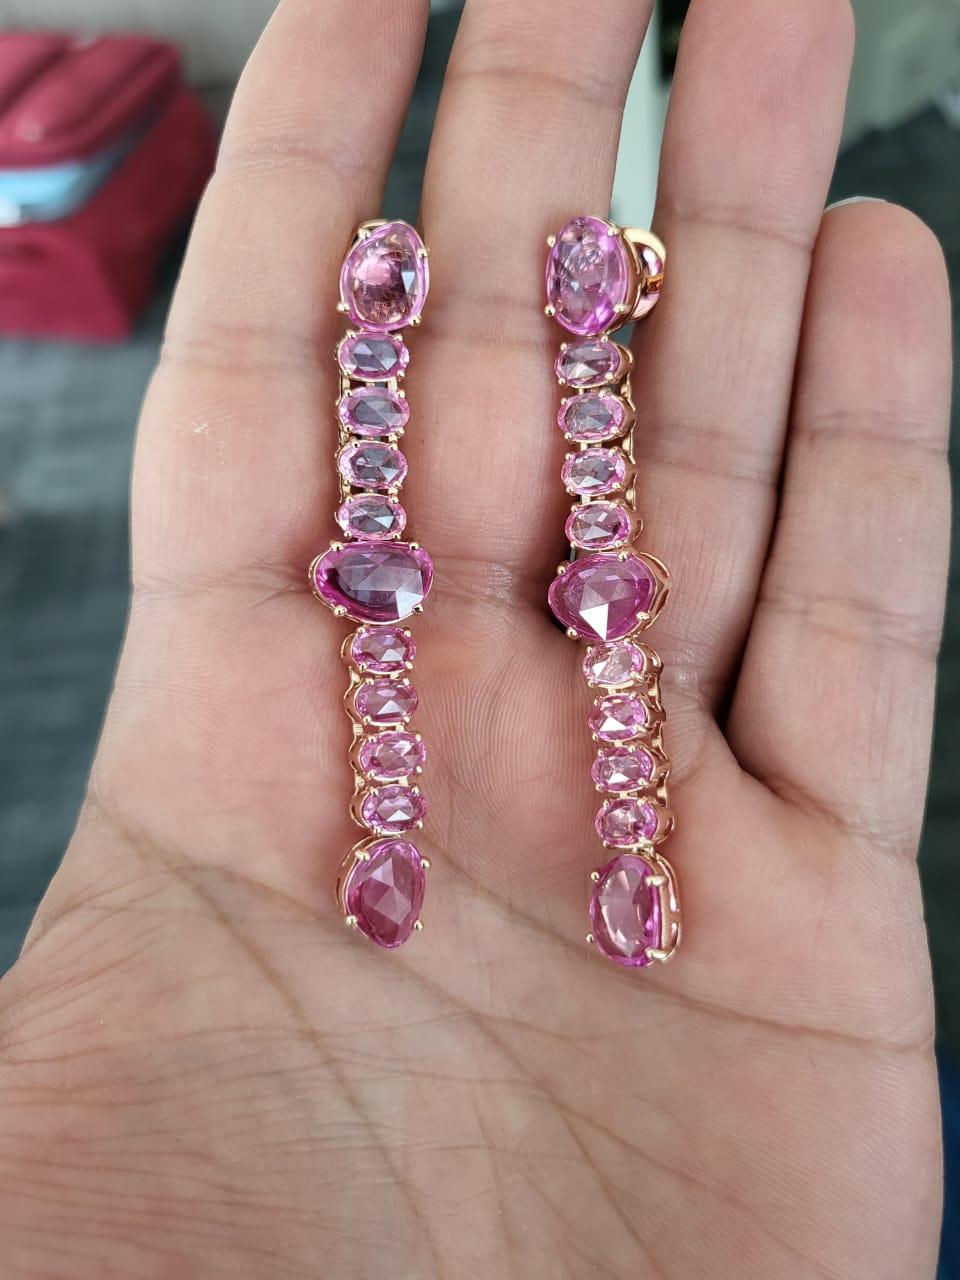 A very gorgeous and beautiful, Pink Sapphire Chandelier Earrings set in 18K Rose Gold. The weight of the Pink Sapphire Rose Cuts is 15.14 carats. The Pink Sapphires are of Ceylon (Sri Lanka) origin. Net Gold weight is 15.01 grams. The dimensions of